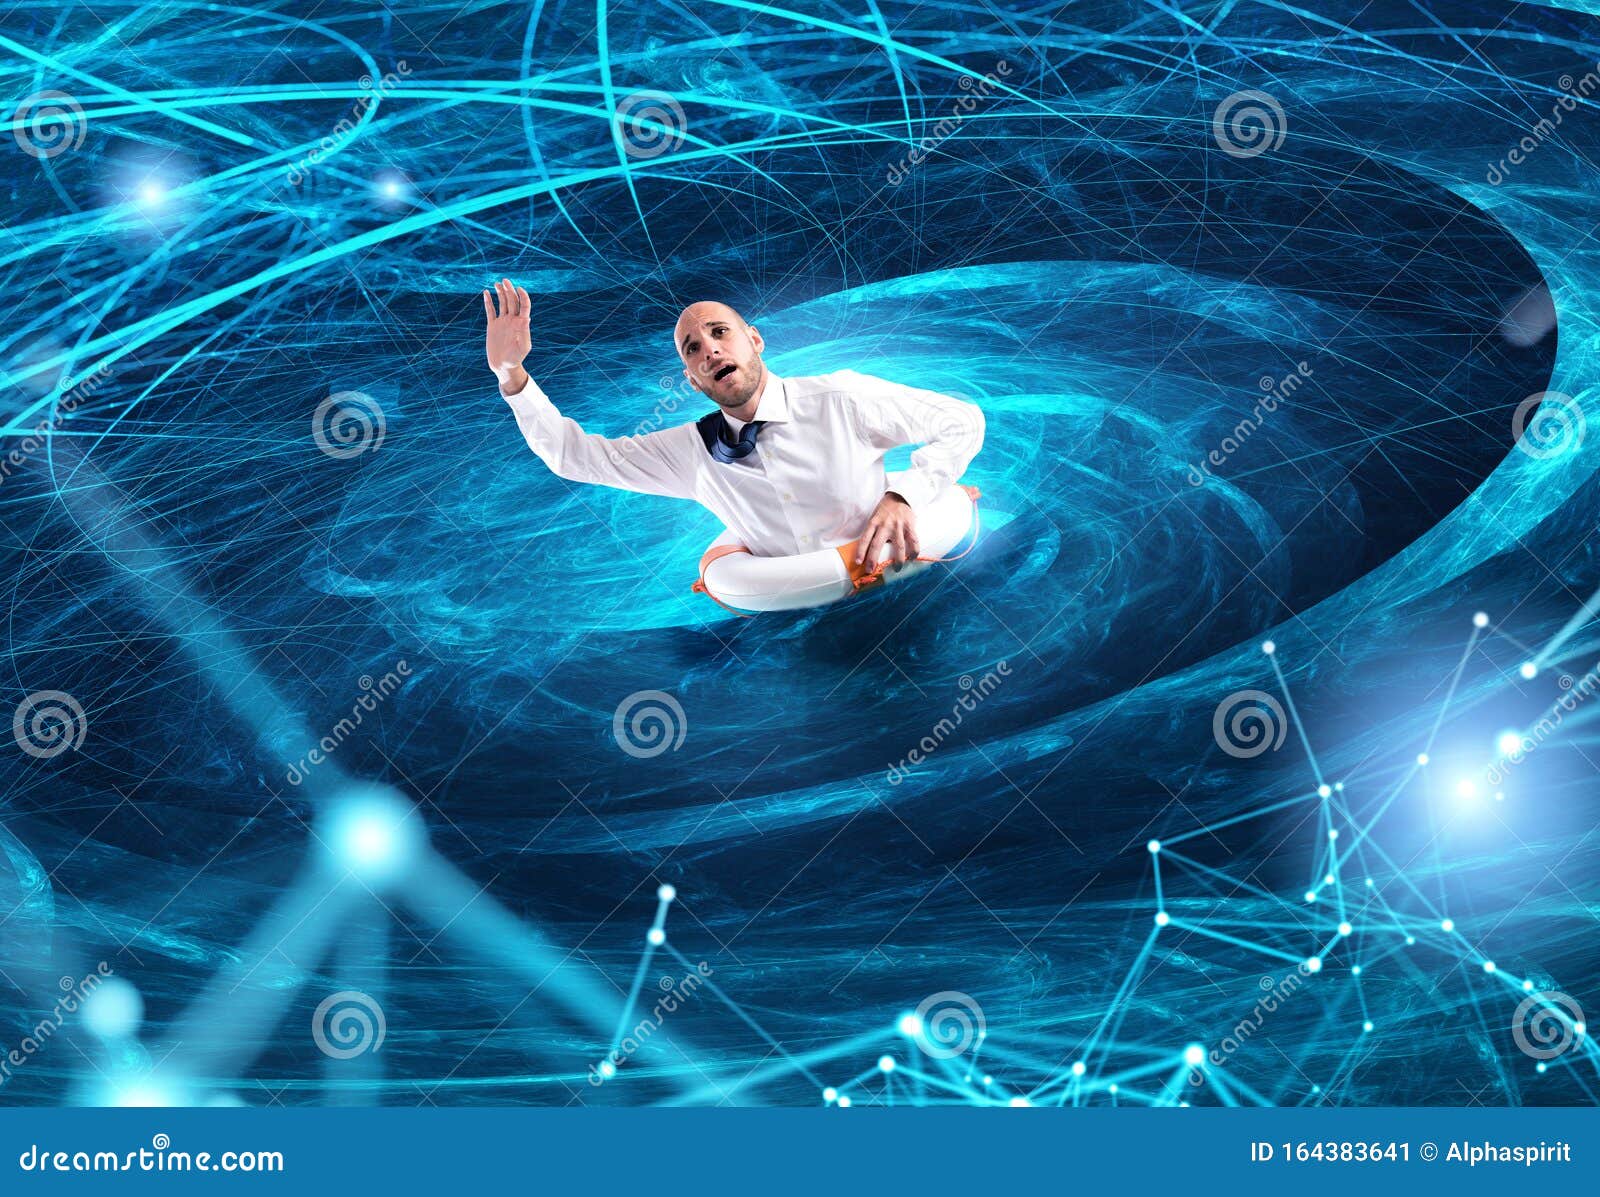 businessman is drowning in a internet storm. concept of internet addiction and overwork